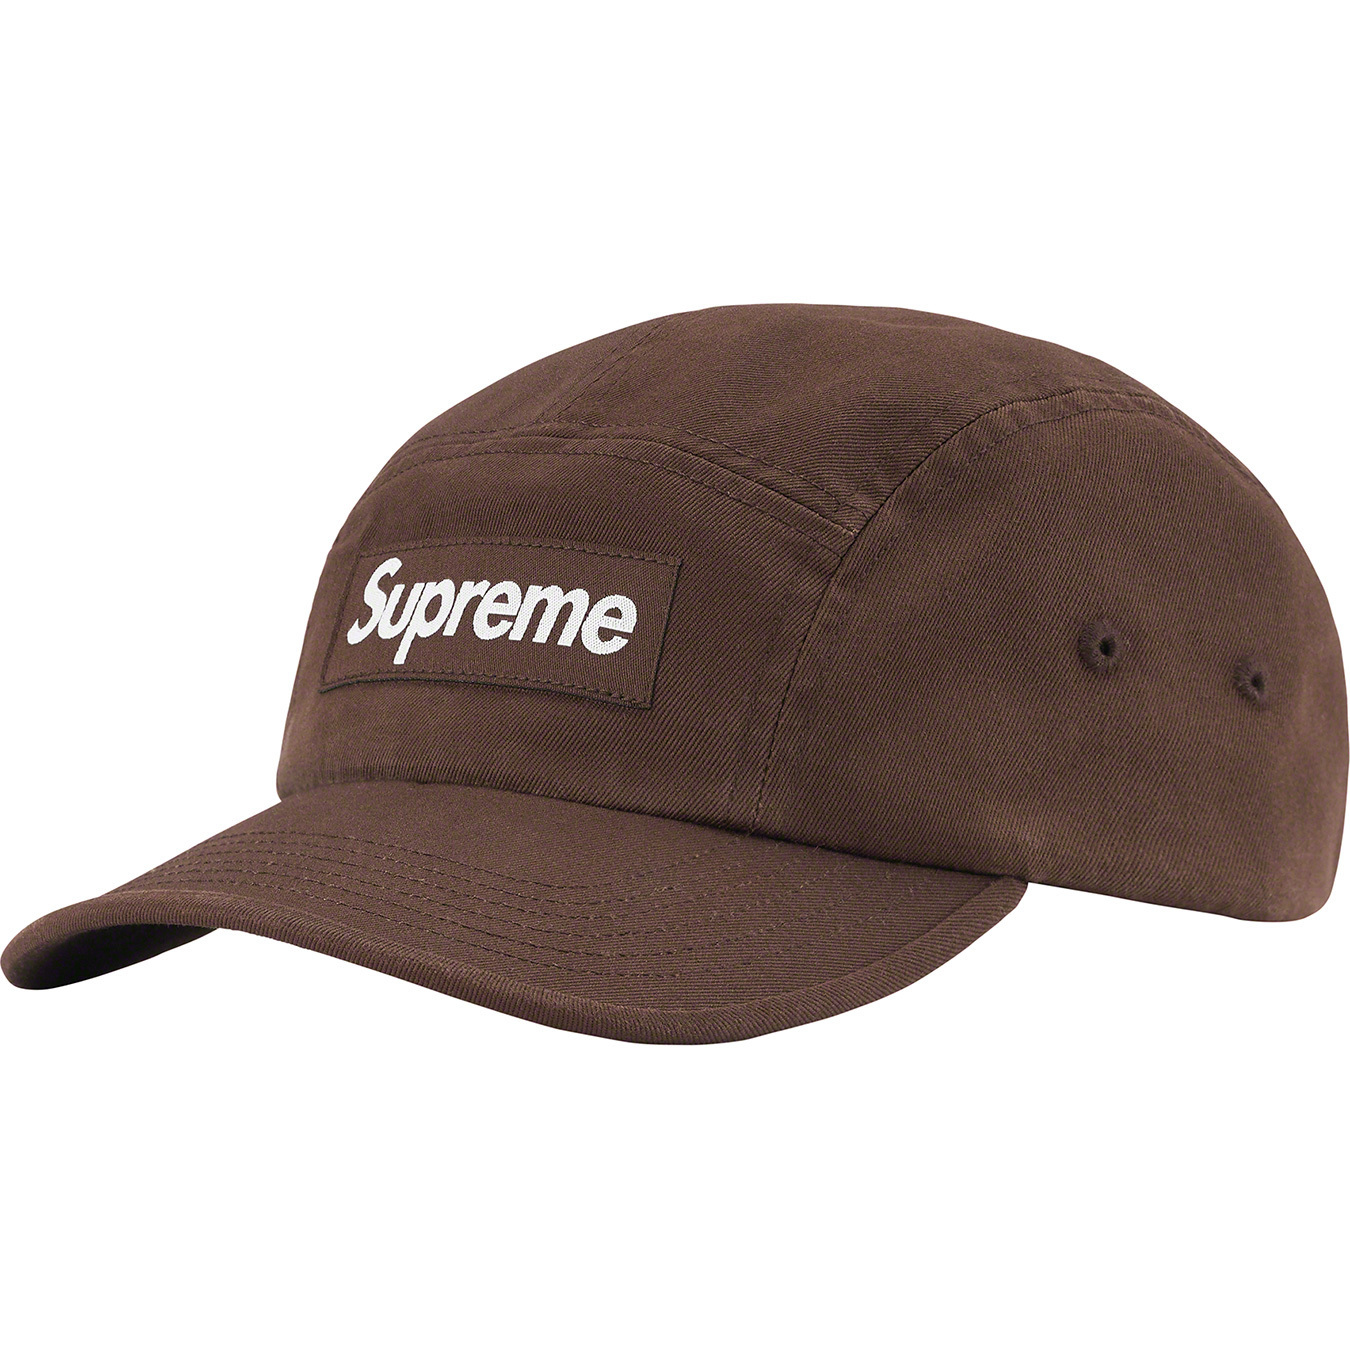 Supreme Washed Chino Twill Camp Cap (3Colors)